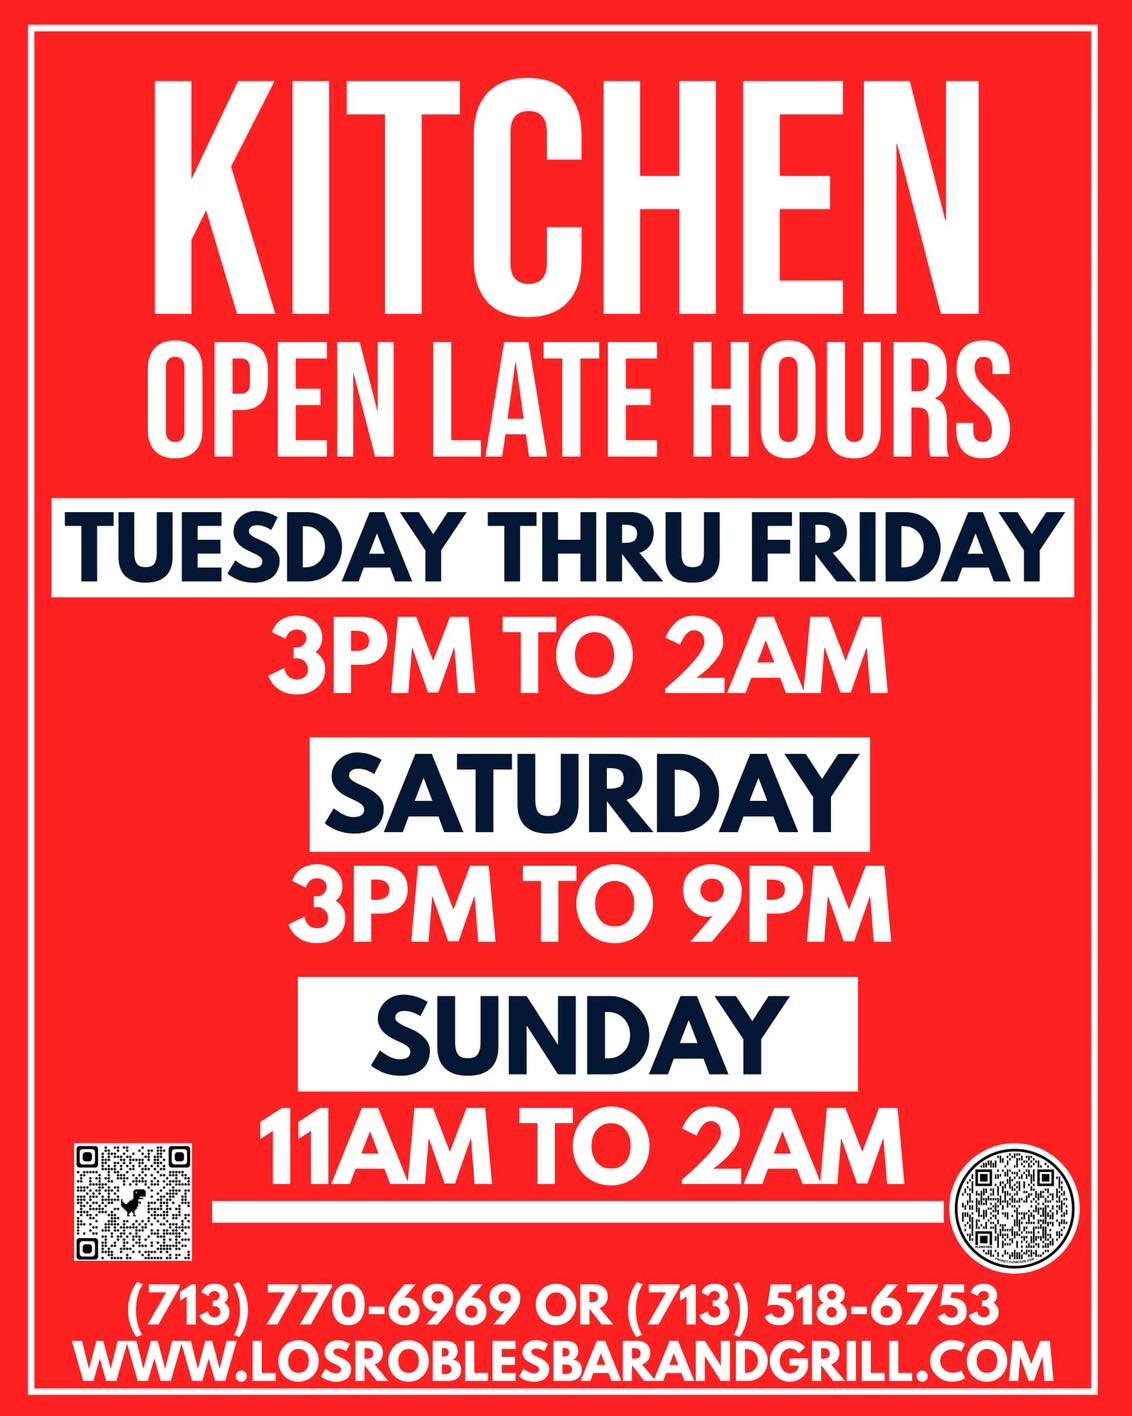 We have now extended out full kitchen hours! So now you can get late night wings, burgers, enchiladas , and more til 2am.